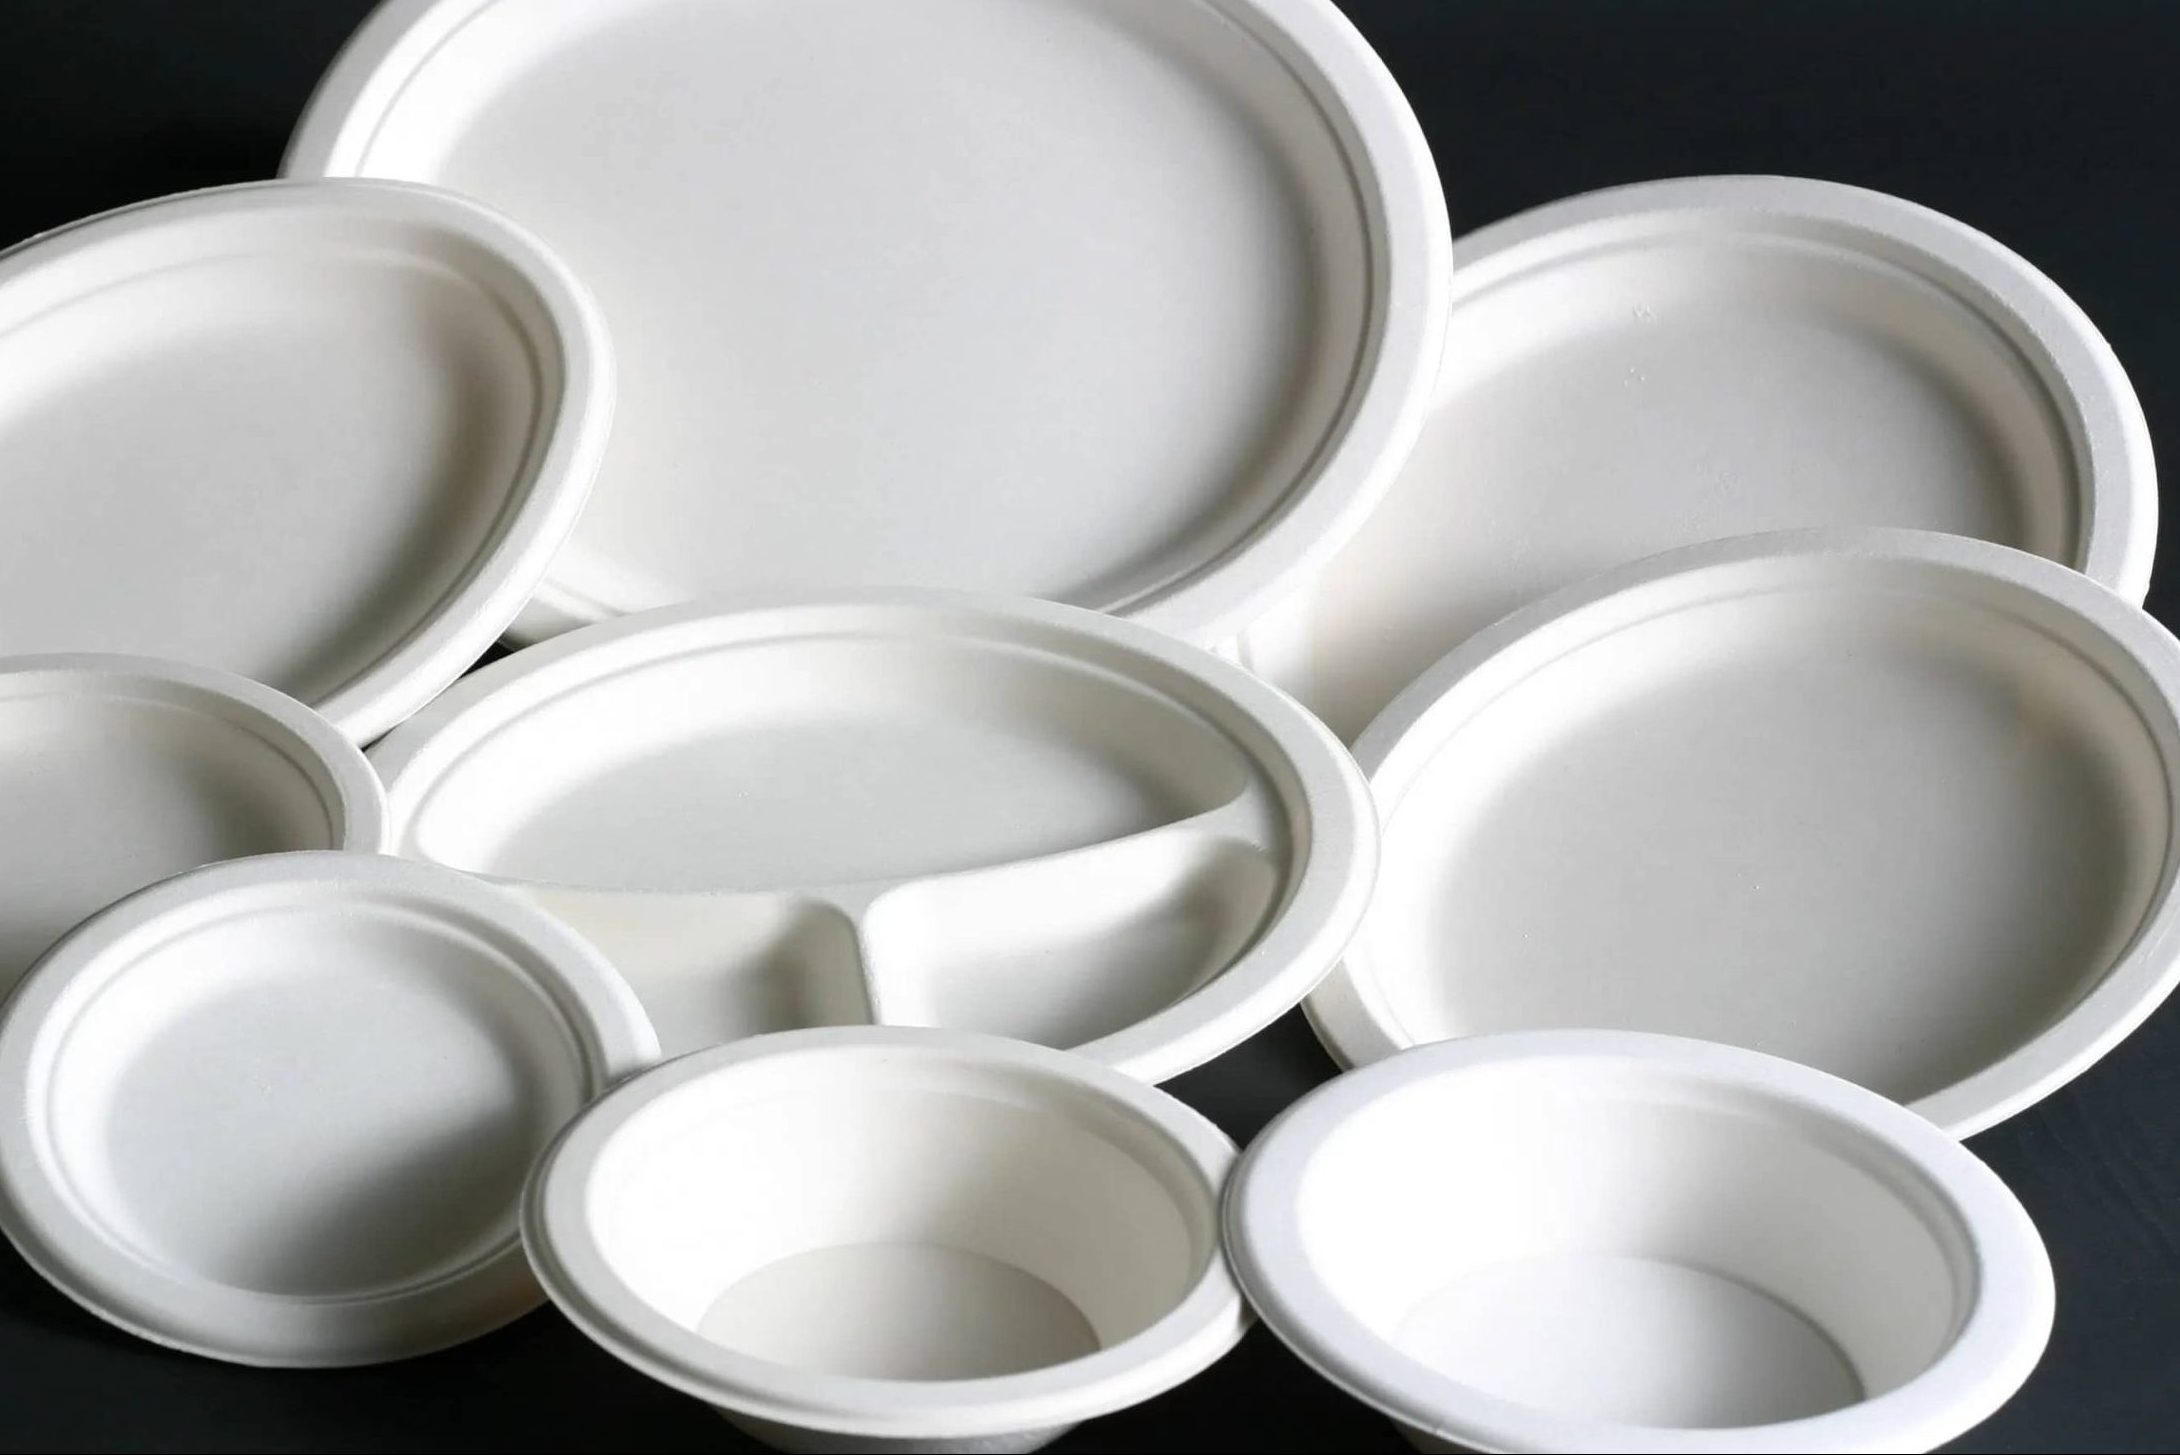 Heavy duty plastic white plates | Reasonable Price, Great Purchase